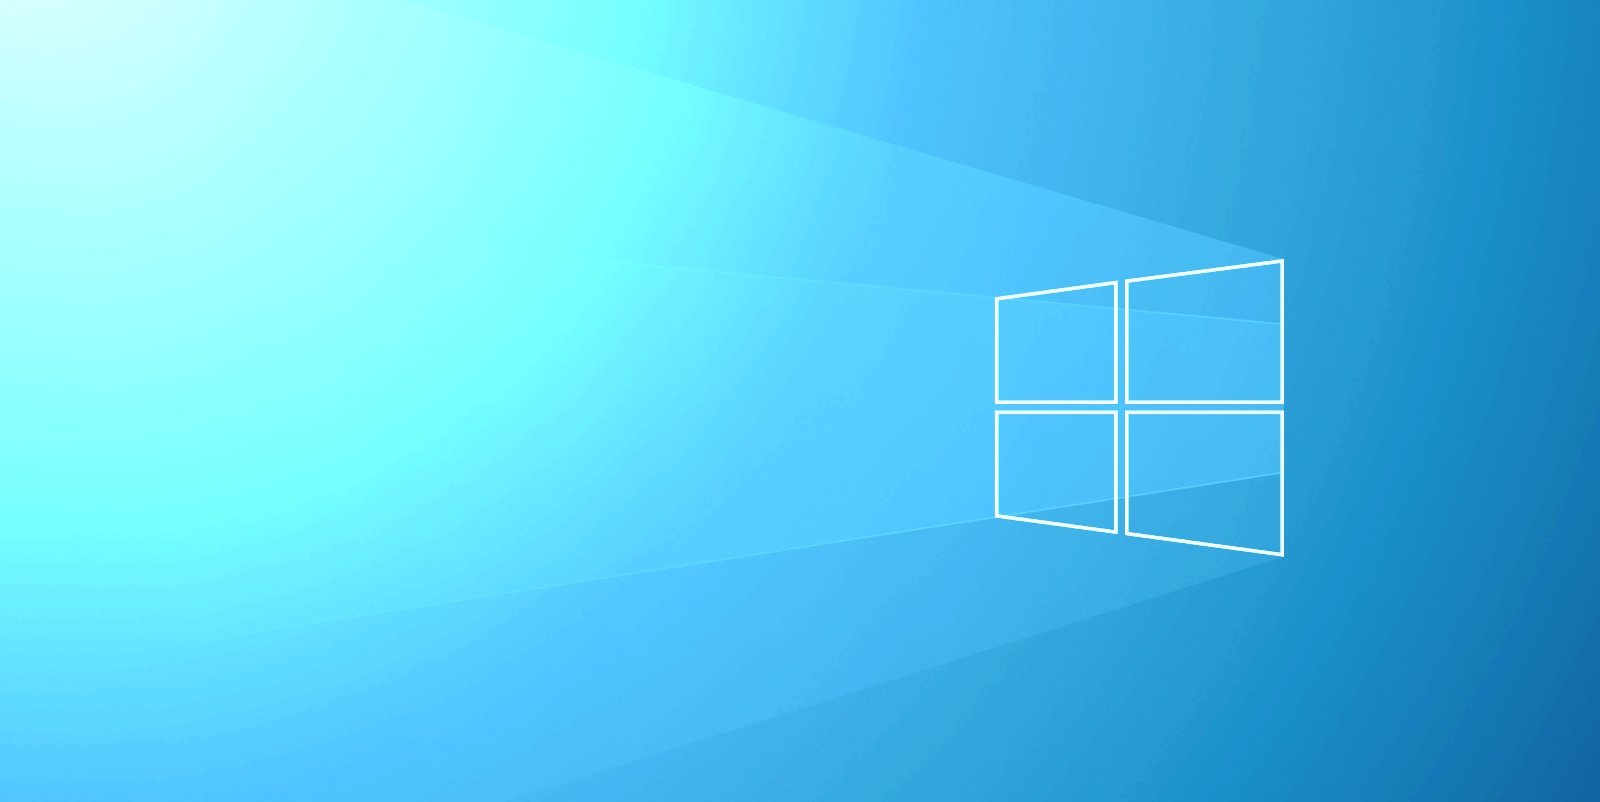 Windows 10 21H2 preview released with new security features